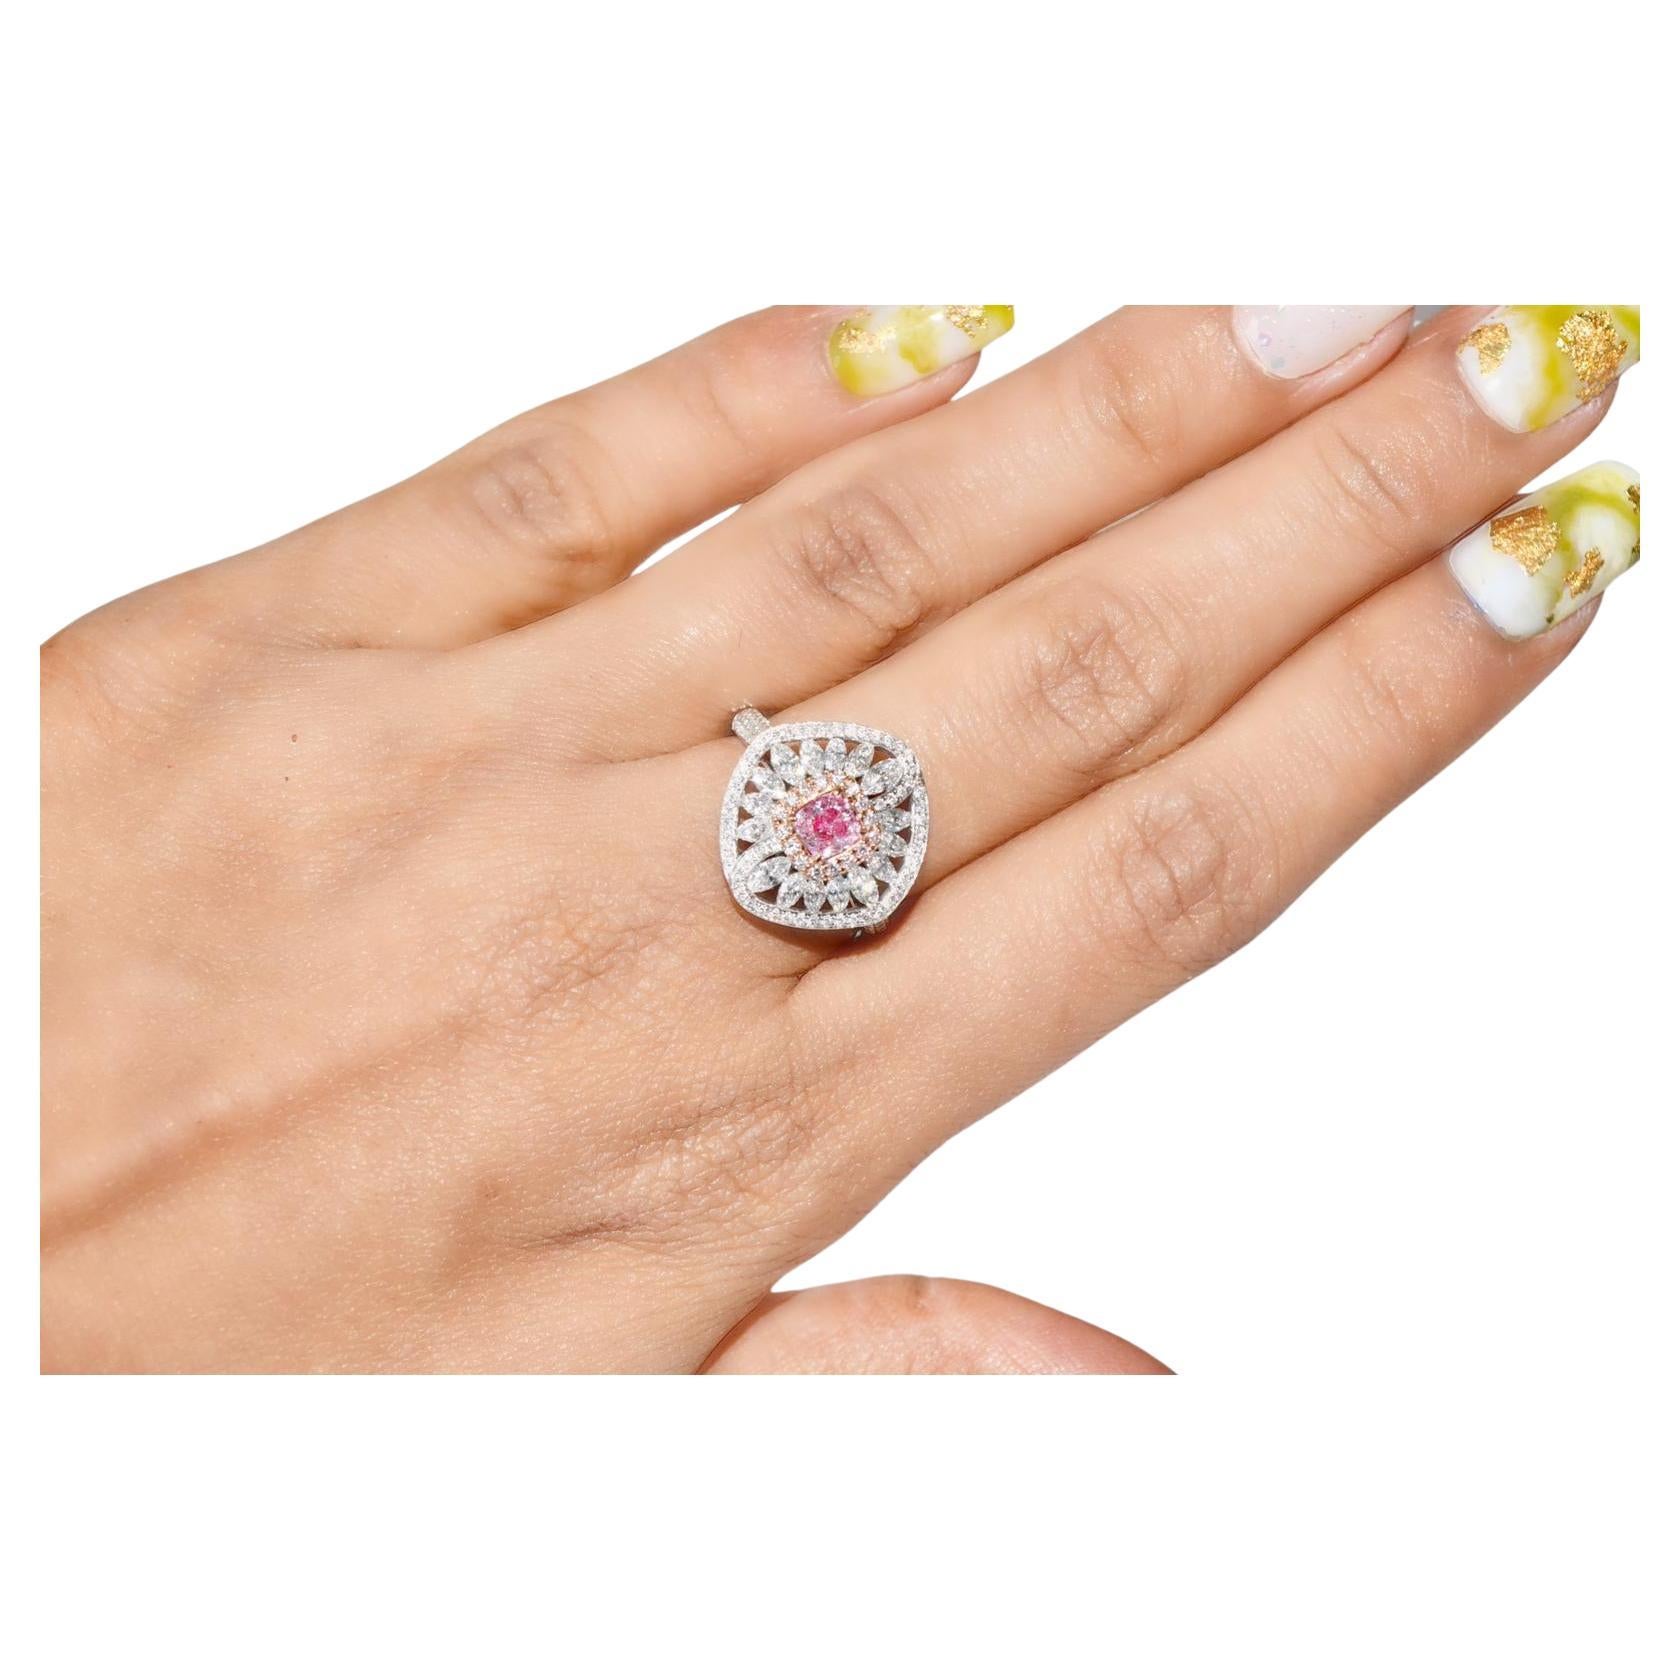 0.43 Carat Faint Pink Diamond Ring I2 Clarity GIA Certified For Sale